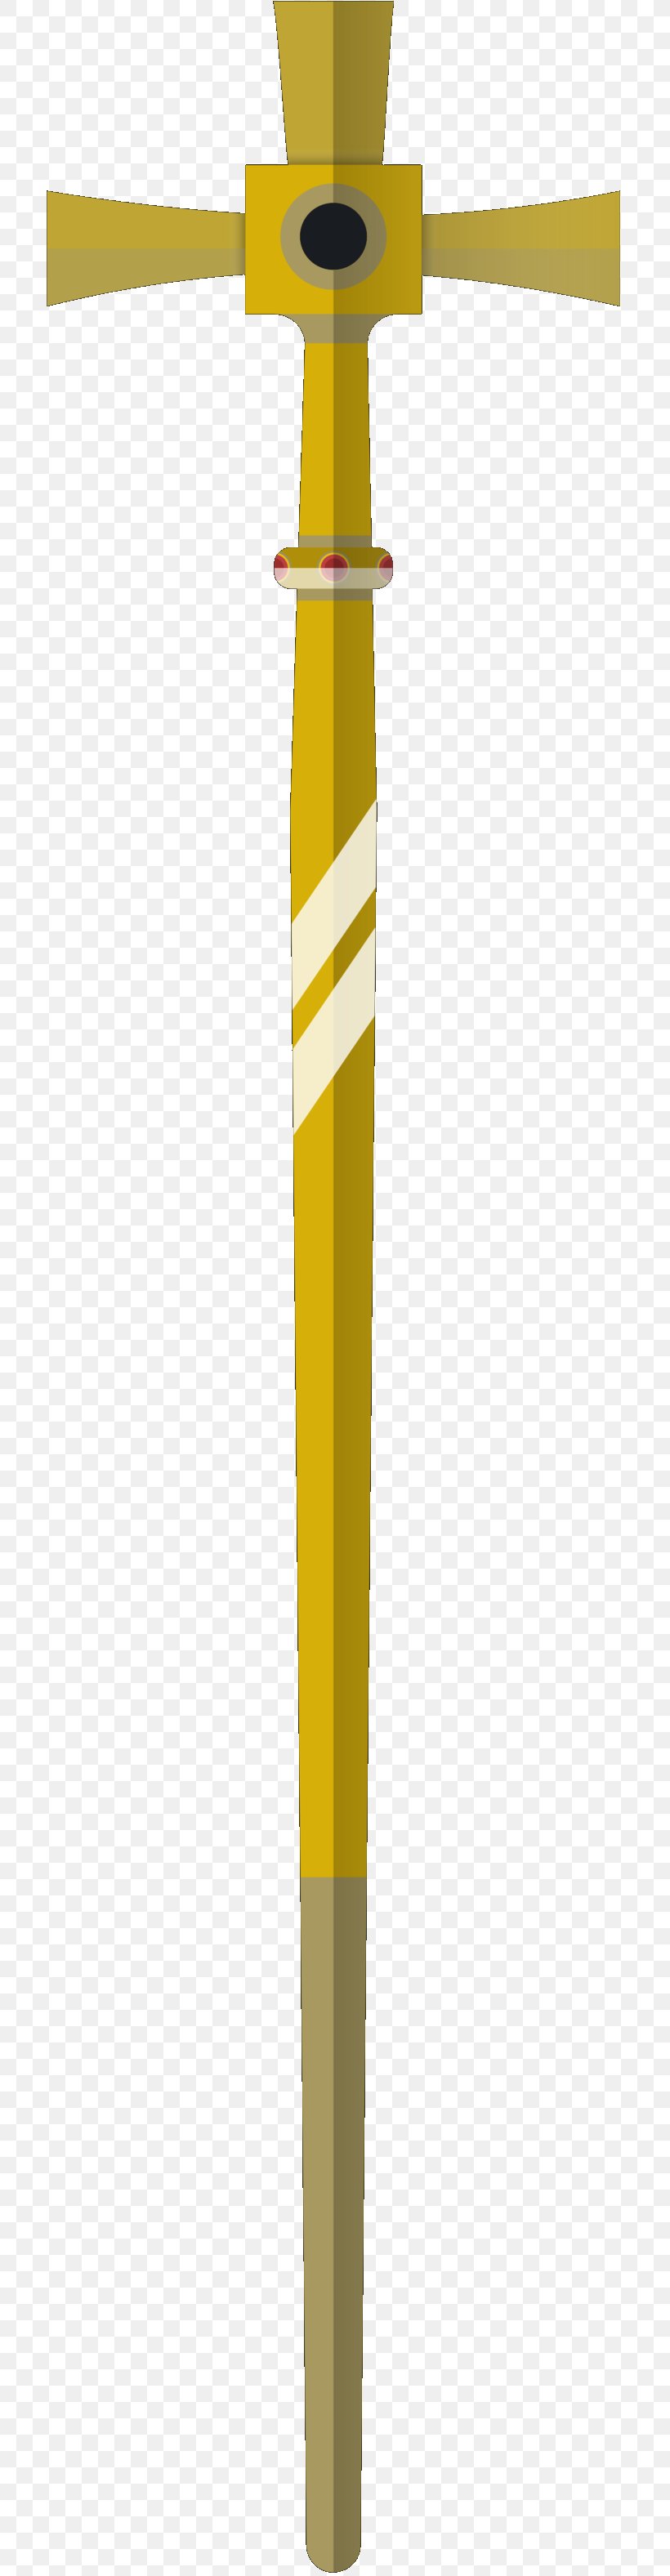 Pickaxe Angle Line Product Design, PNG, 717x3153px, Pickaxe, Yellow Download Free